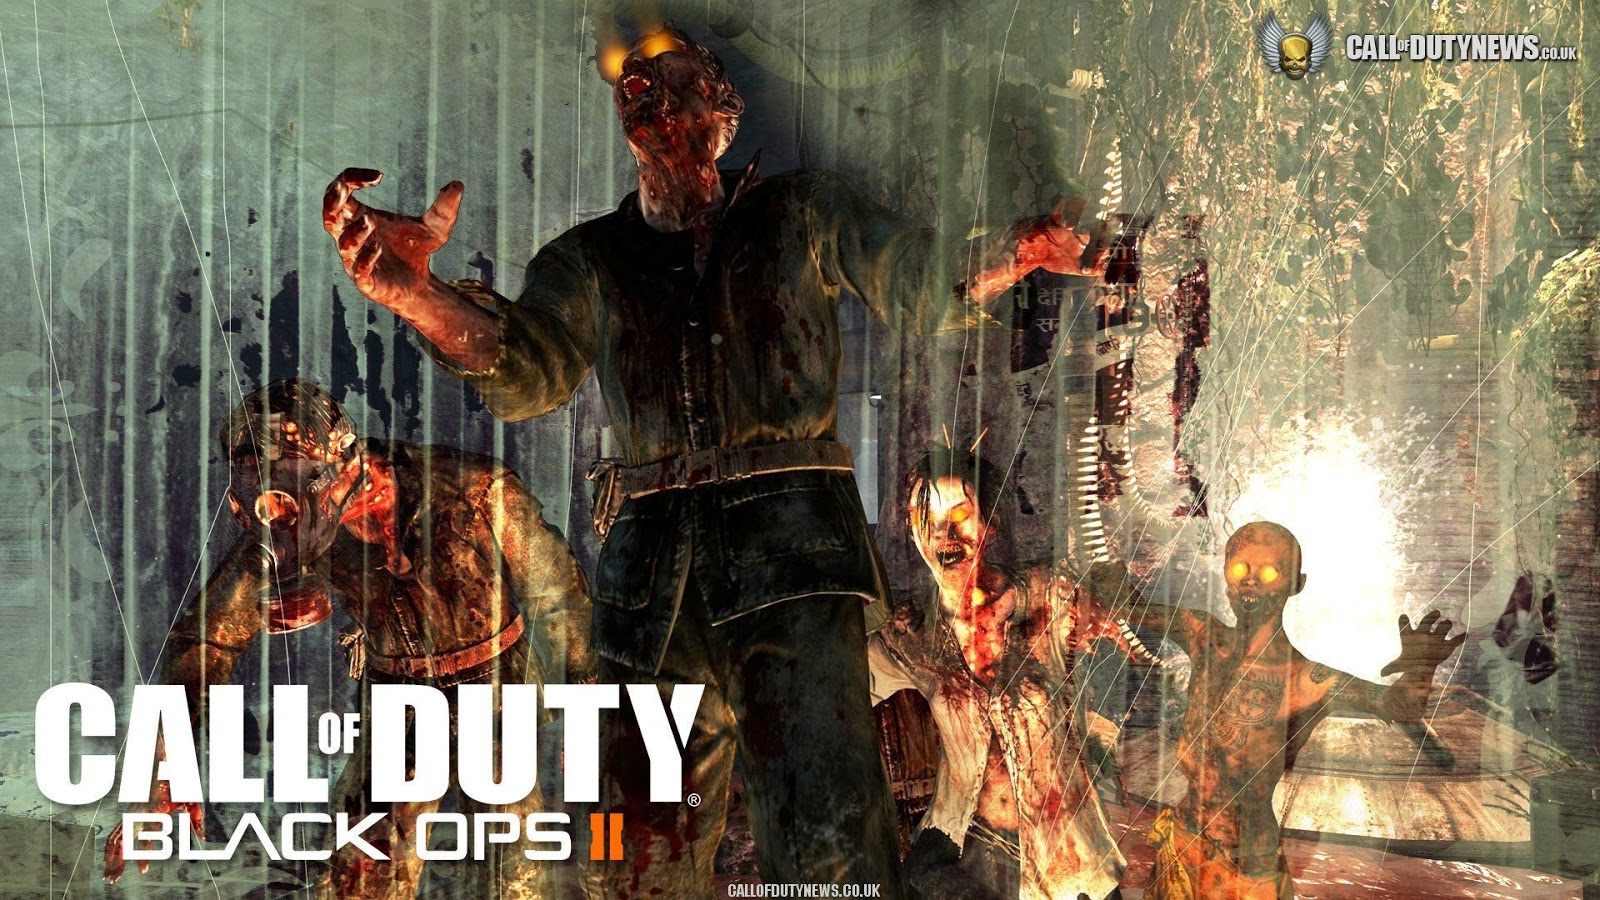 black ops 3 zombies wallpaper,action adventure game,pc game,movie,video game software,fictional character